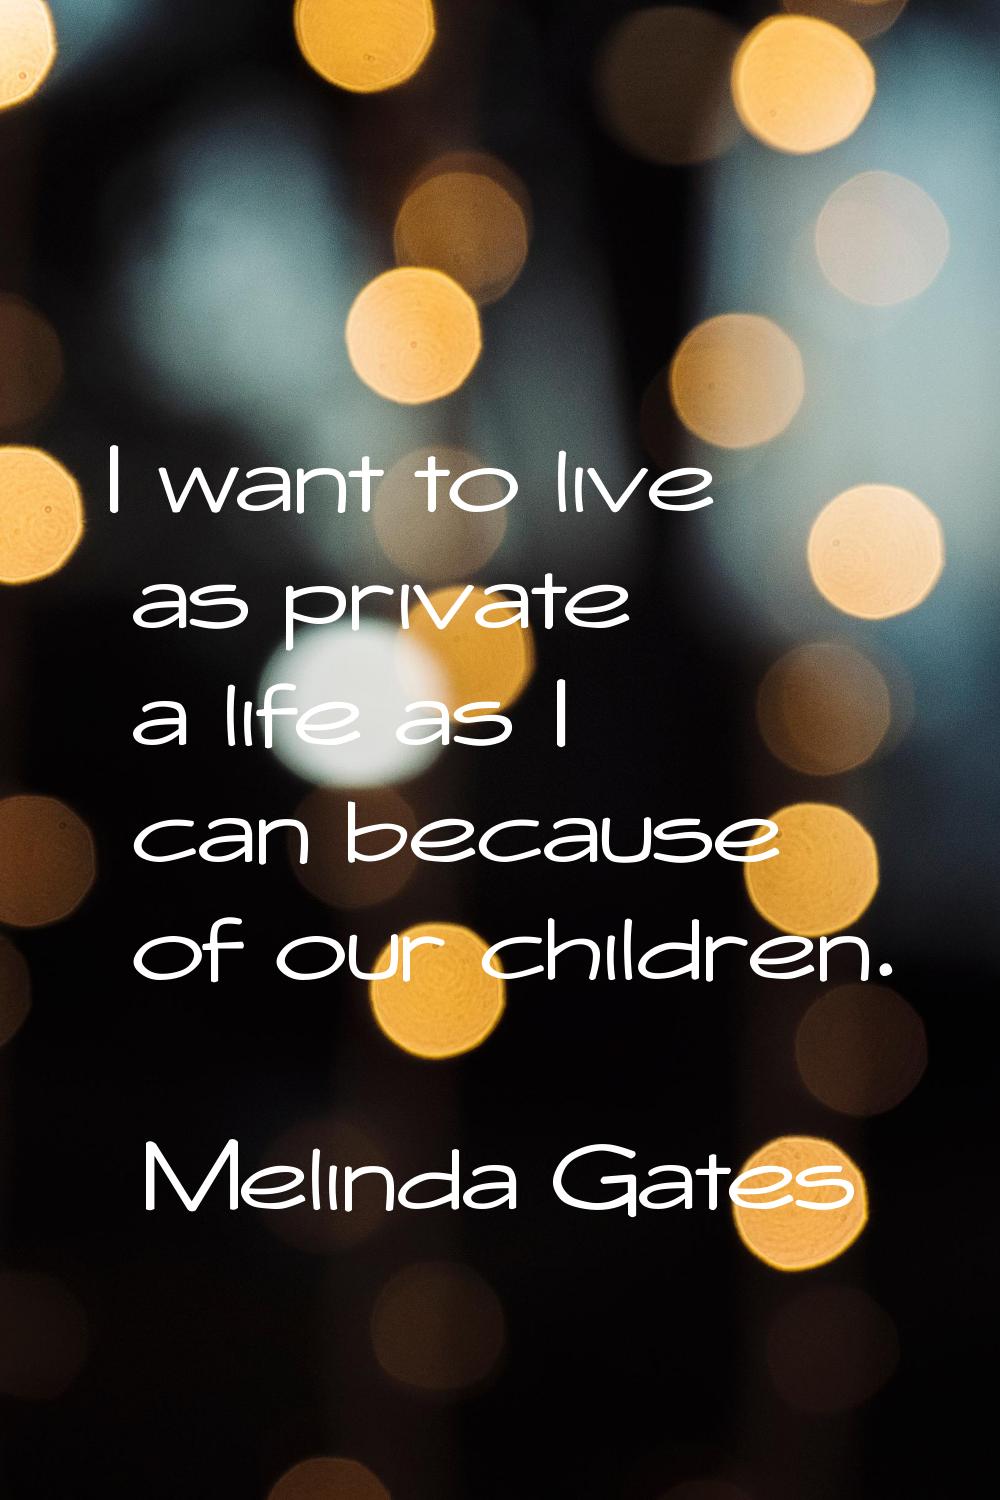 I want to live as private a life as I can because of our children.